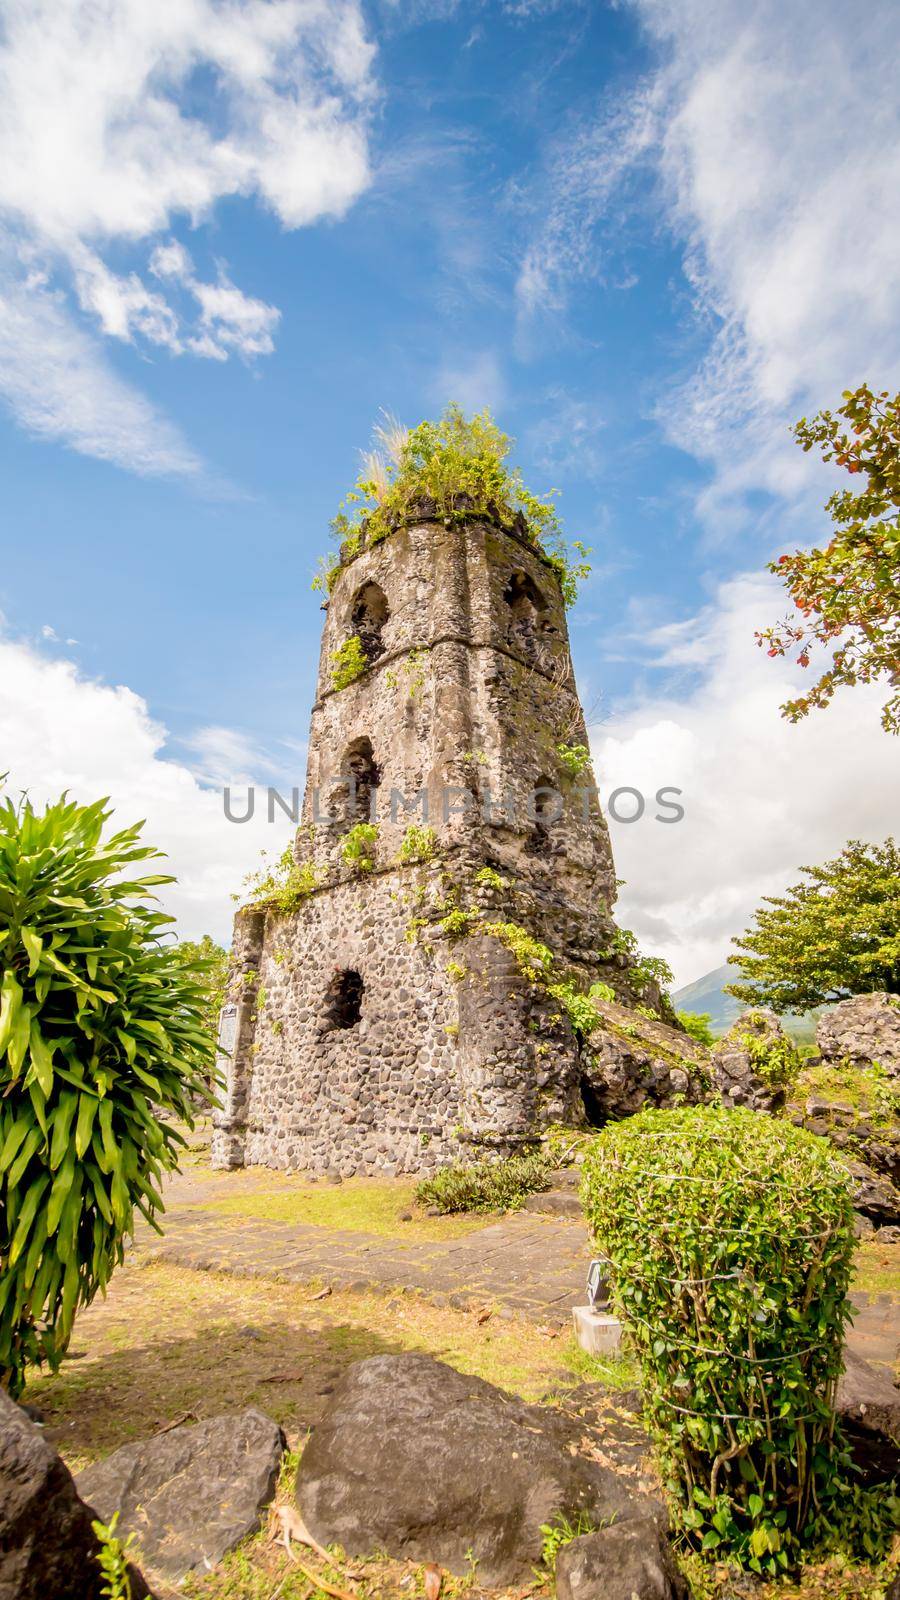 Cagsawa church ruins with Mount Mayon volcano in the background, Legazpi, Philippines.